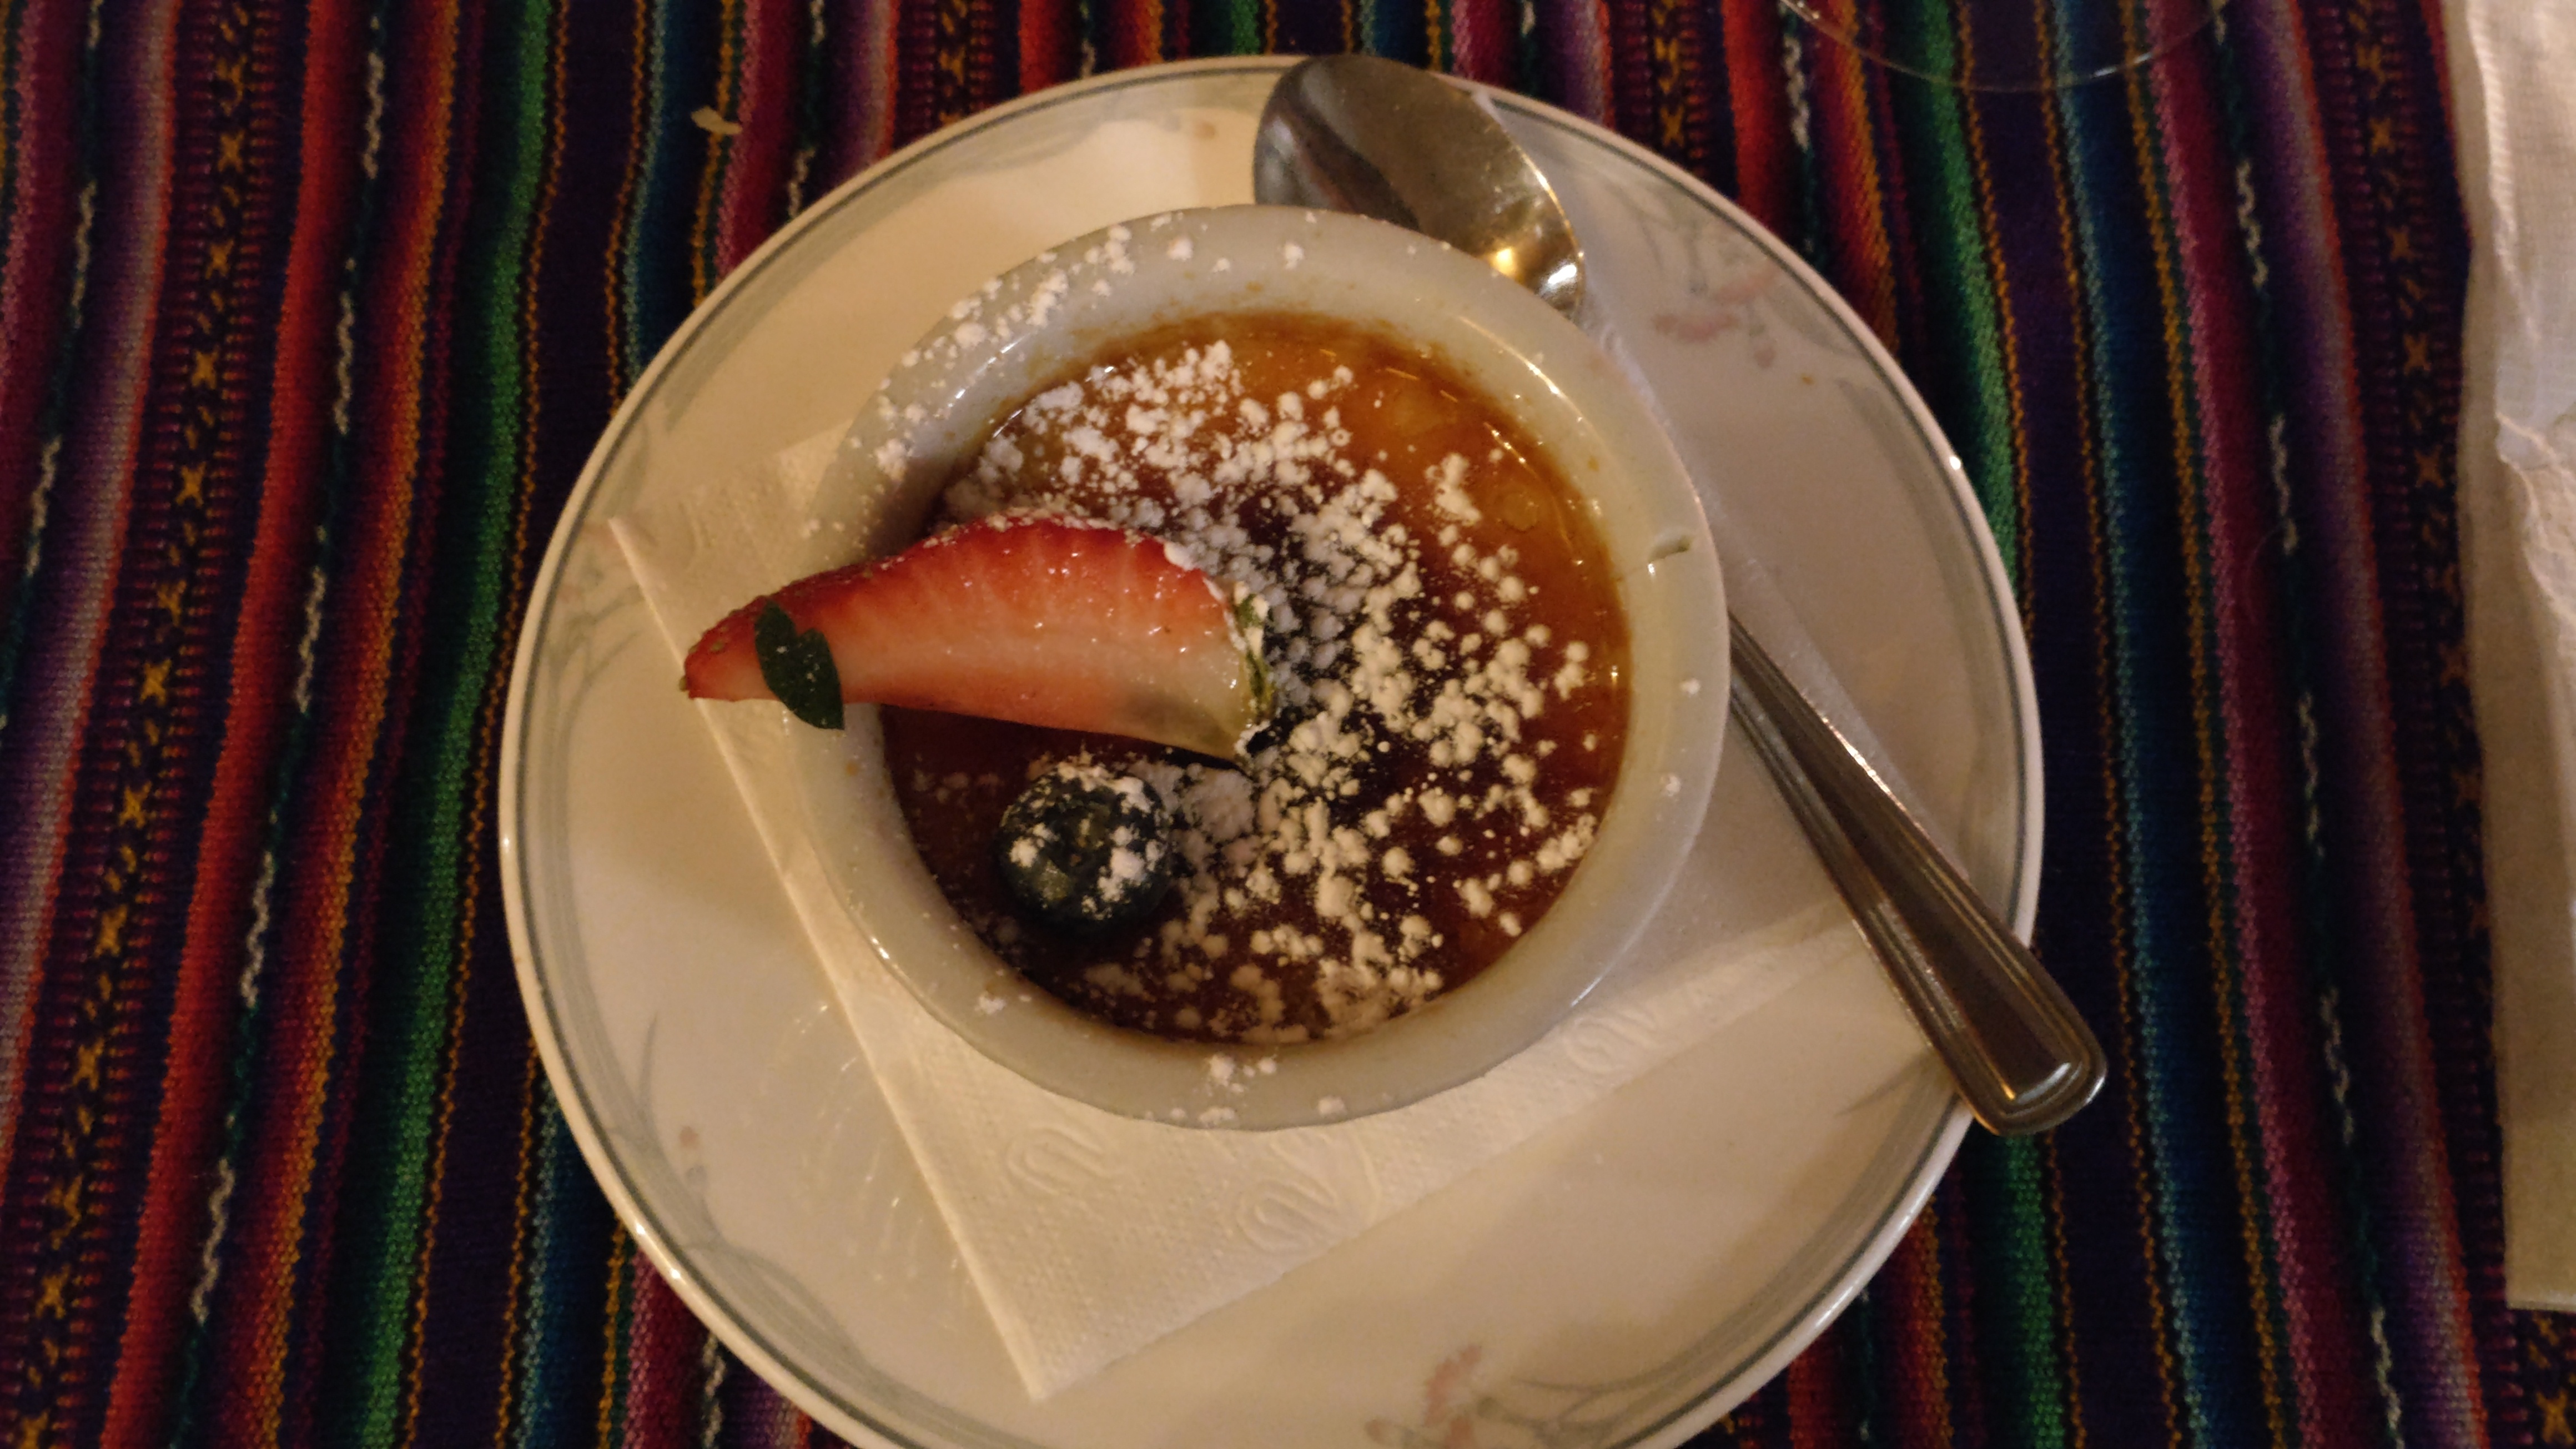 Creme brulée topped with a strawberry wedge, a blueberry, and a dusting of icing sugar